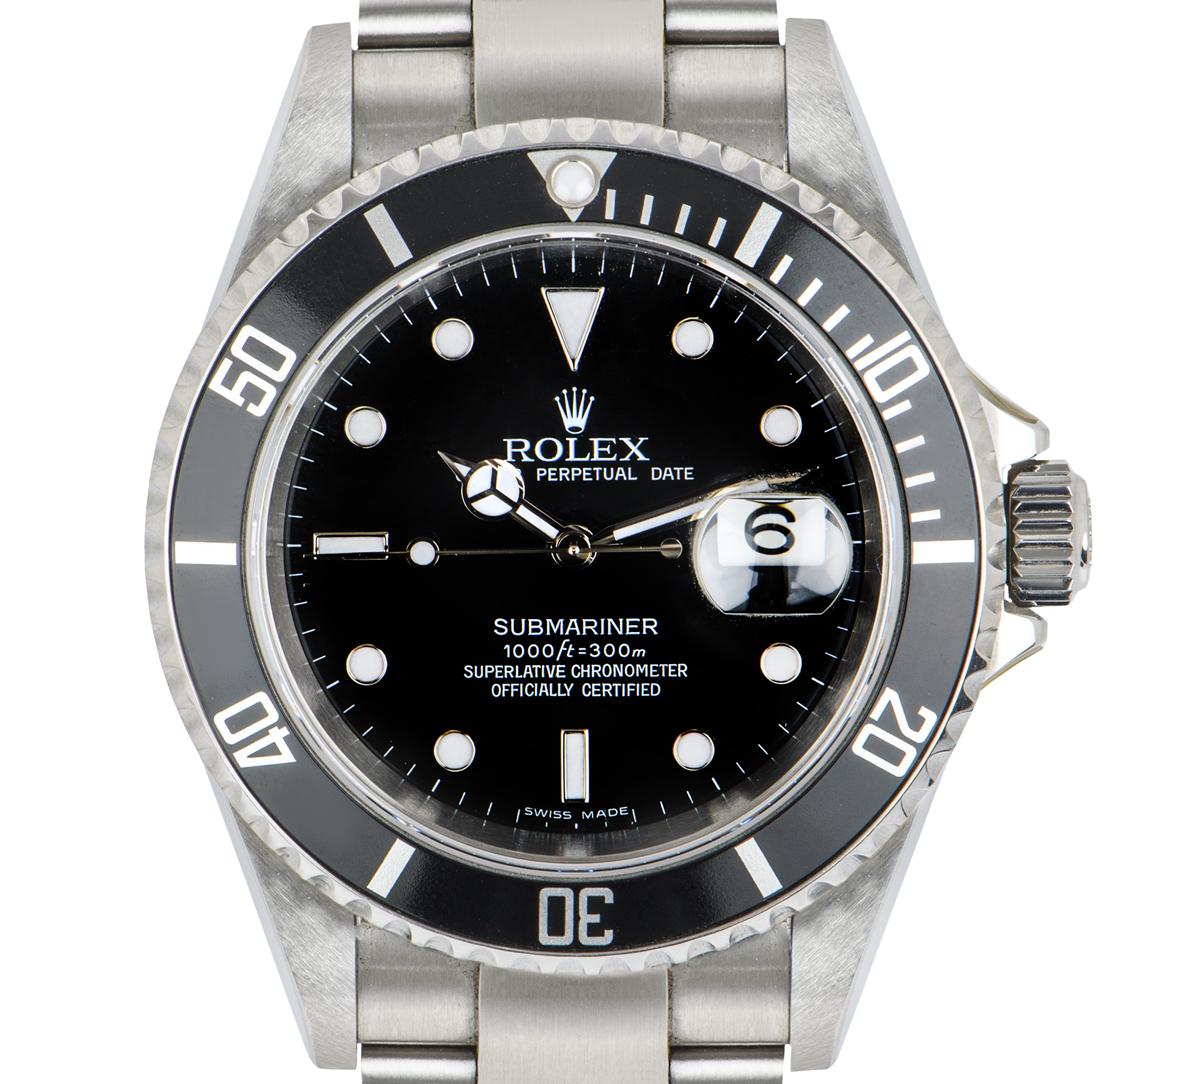 A men's 40mm Submariner Date in Oyster steel by Rolex. Featuring a black dial with a unidirectional rotating bezel and a black 60-minute graduation bezel insert.

Fitted with a scratch resistant sapphire crystal and powered by a self-winding